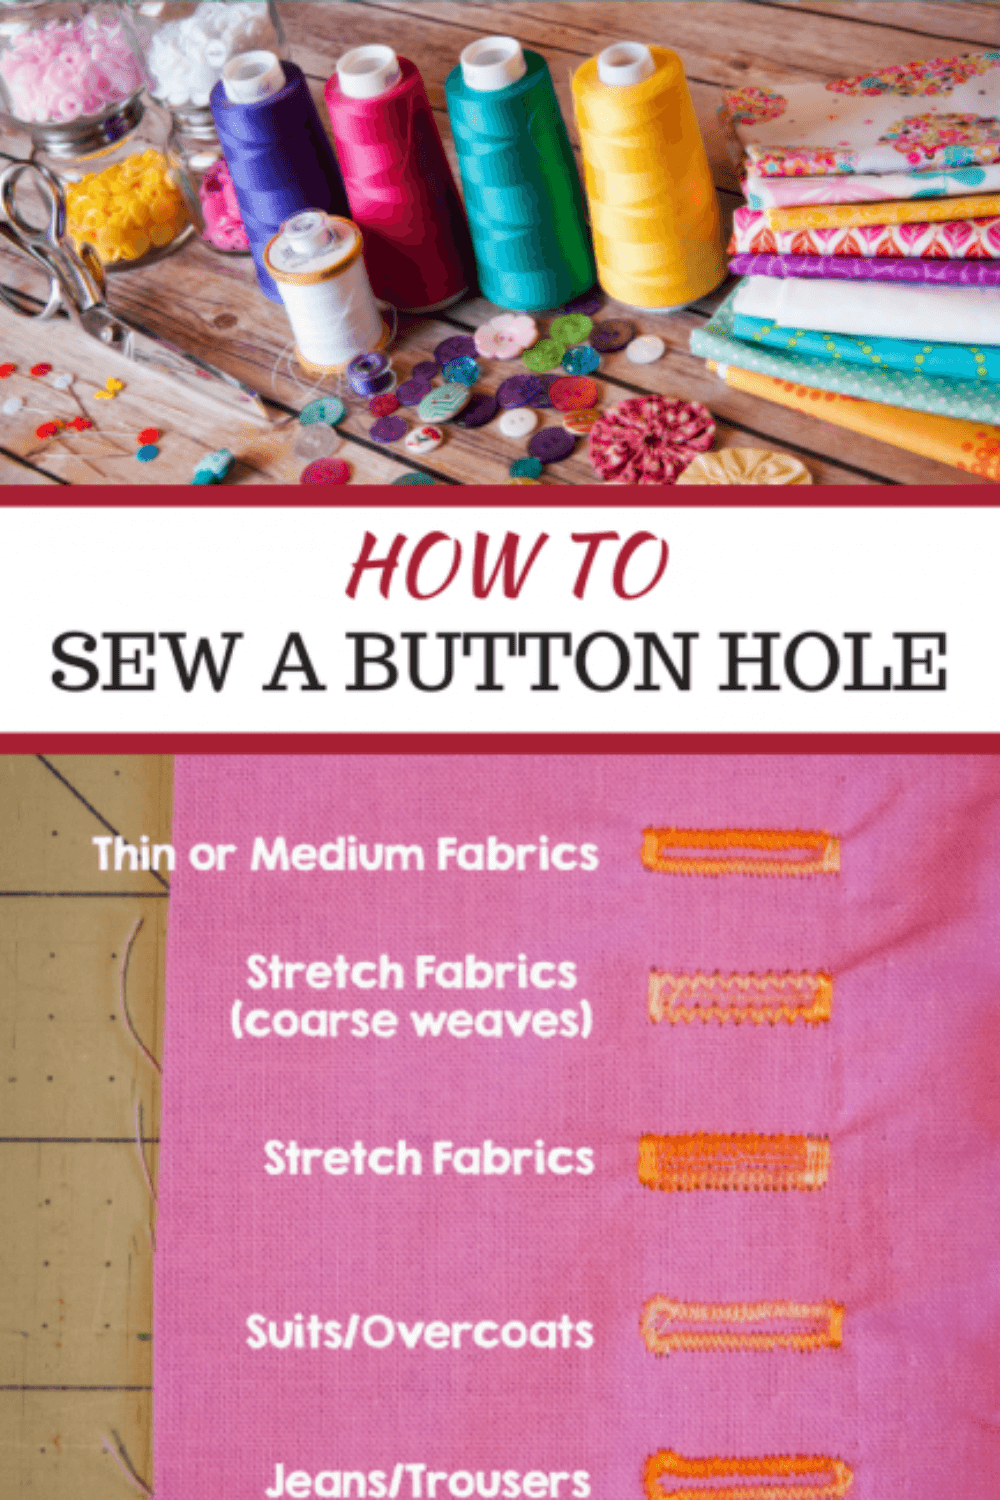 How to Sew a Buttonhole | Sewing Buttonholes